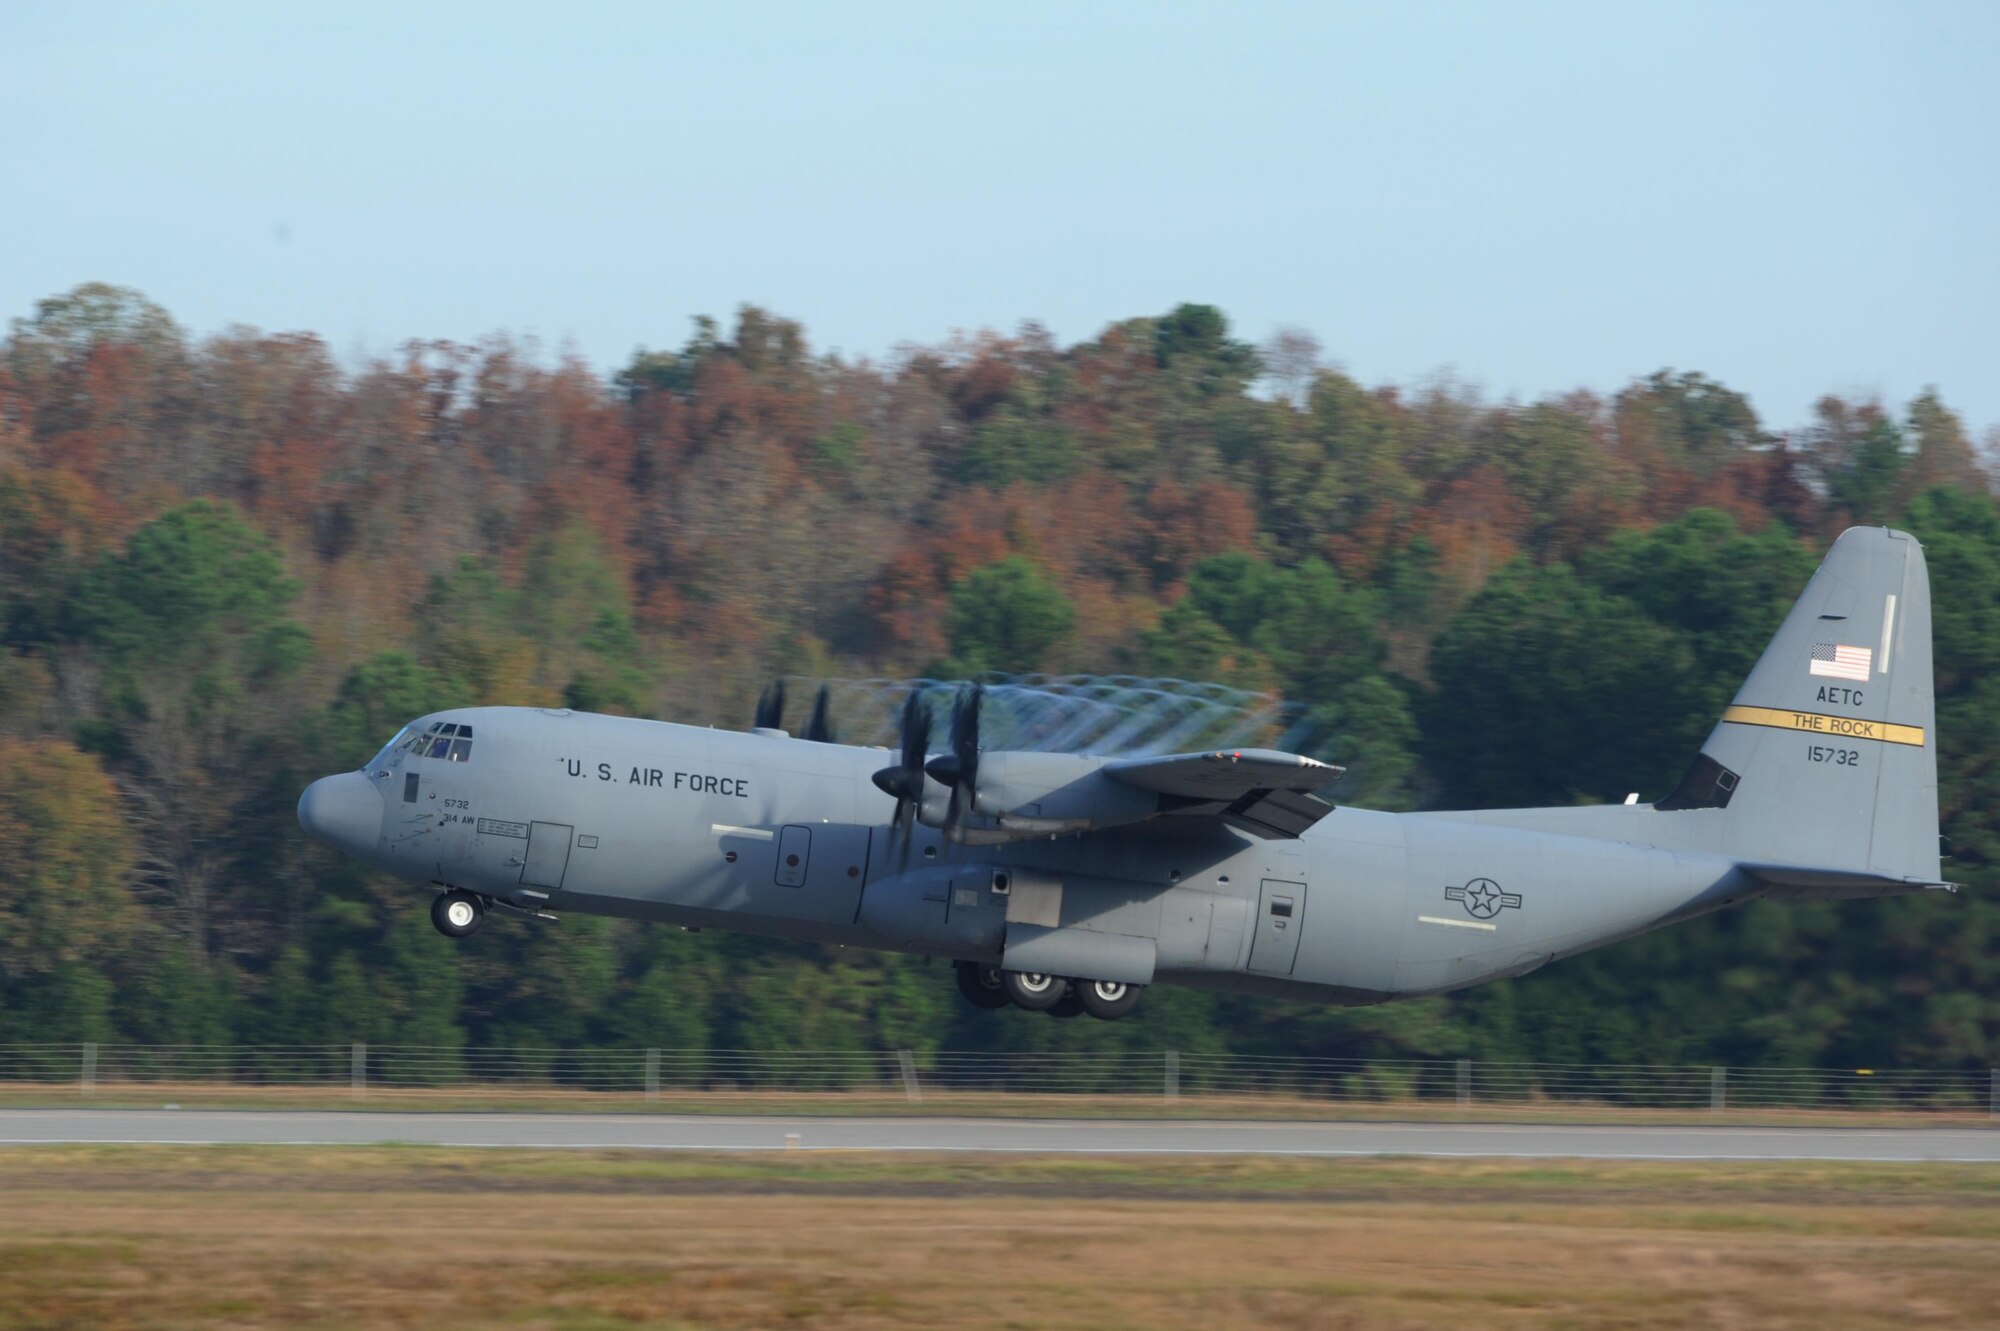 A C-130J takes off from the flightline during an 11-ship C-130J formation Oct. 24, 2016, at Little Rock Air Force Base, Ark. The aircraft is capable of operating from rough dirt-strips and is the primary transport for airdropping troops and equipment into hostile areas. (U.S. Air Force photo by Airman Grace Nichols)